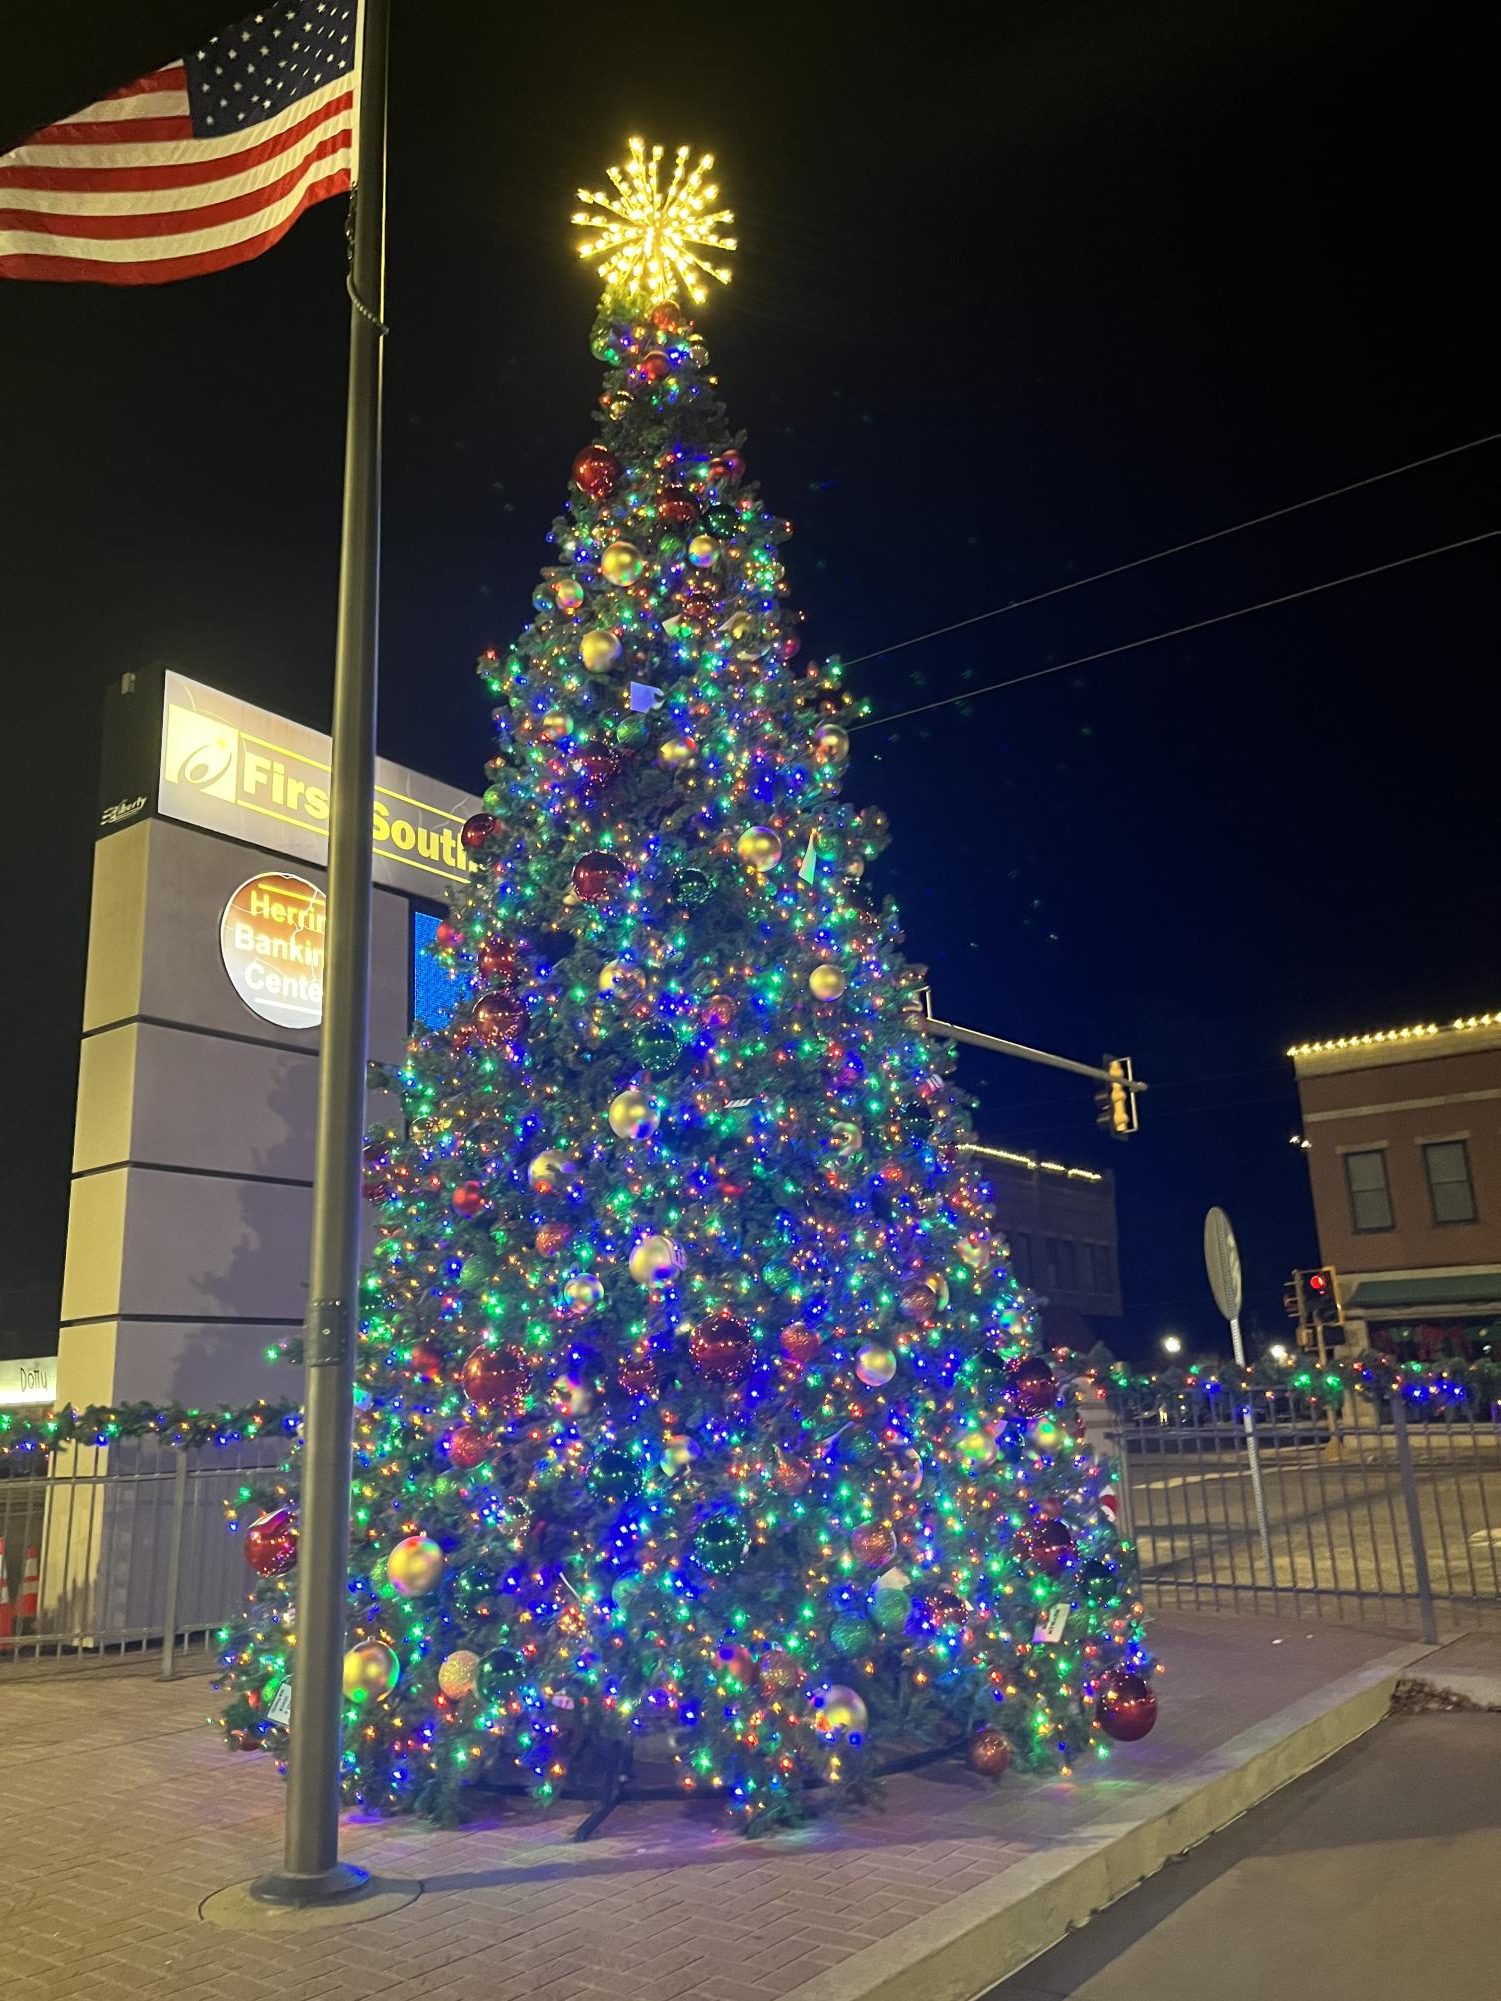 The Christmas tree in downtown Herrin lit in the night.